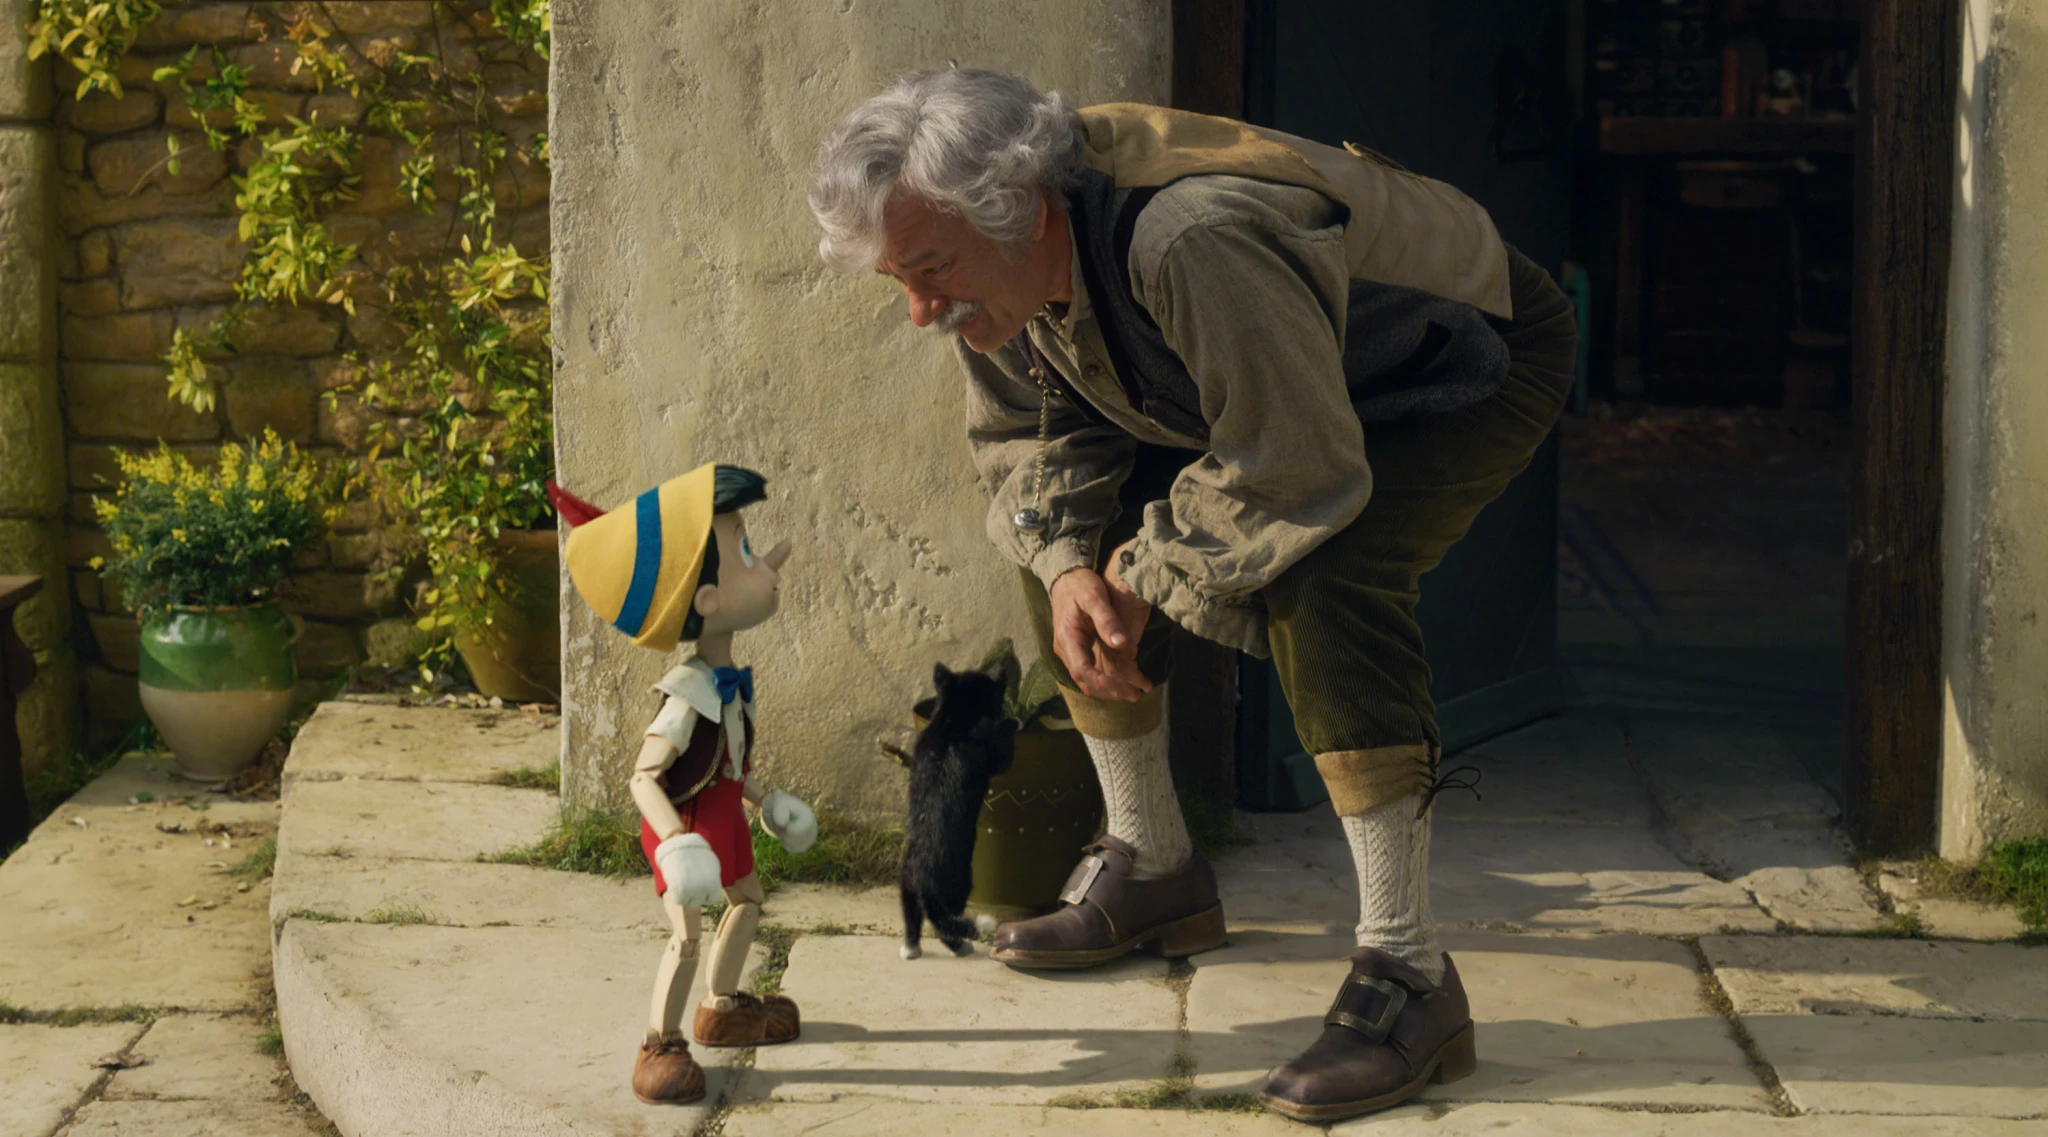 'Pinocchio' Trailer Reveals What Happens When Tom Hanks Wishes Upon a Star